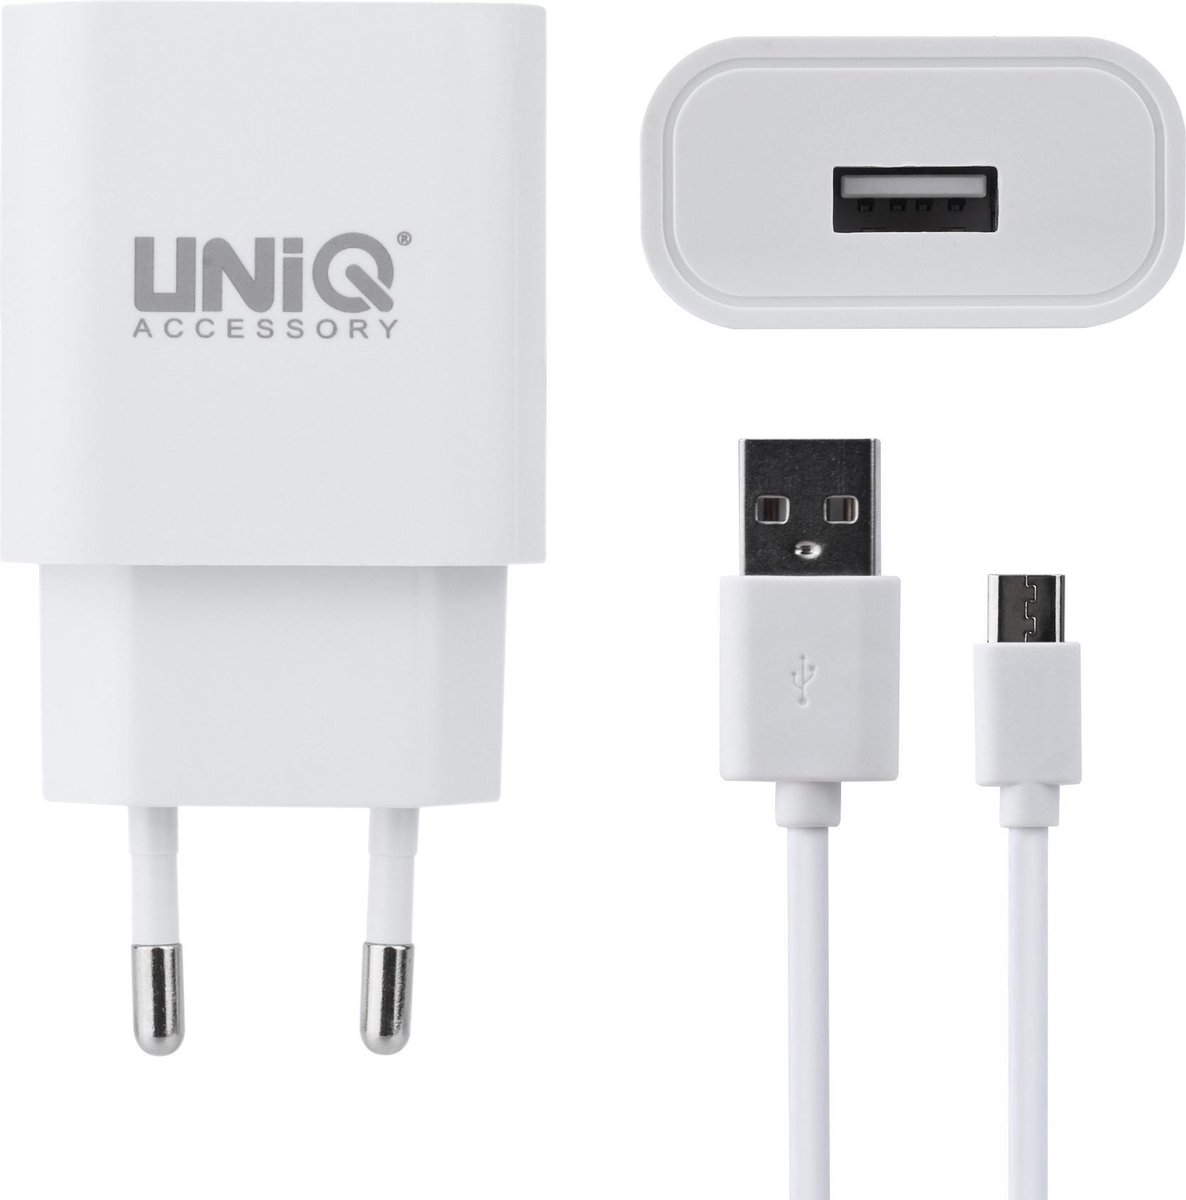 UNIQ Accessory 2.4A travel charger - USB Type-C Wit (CE)